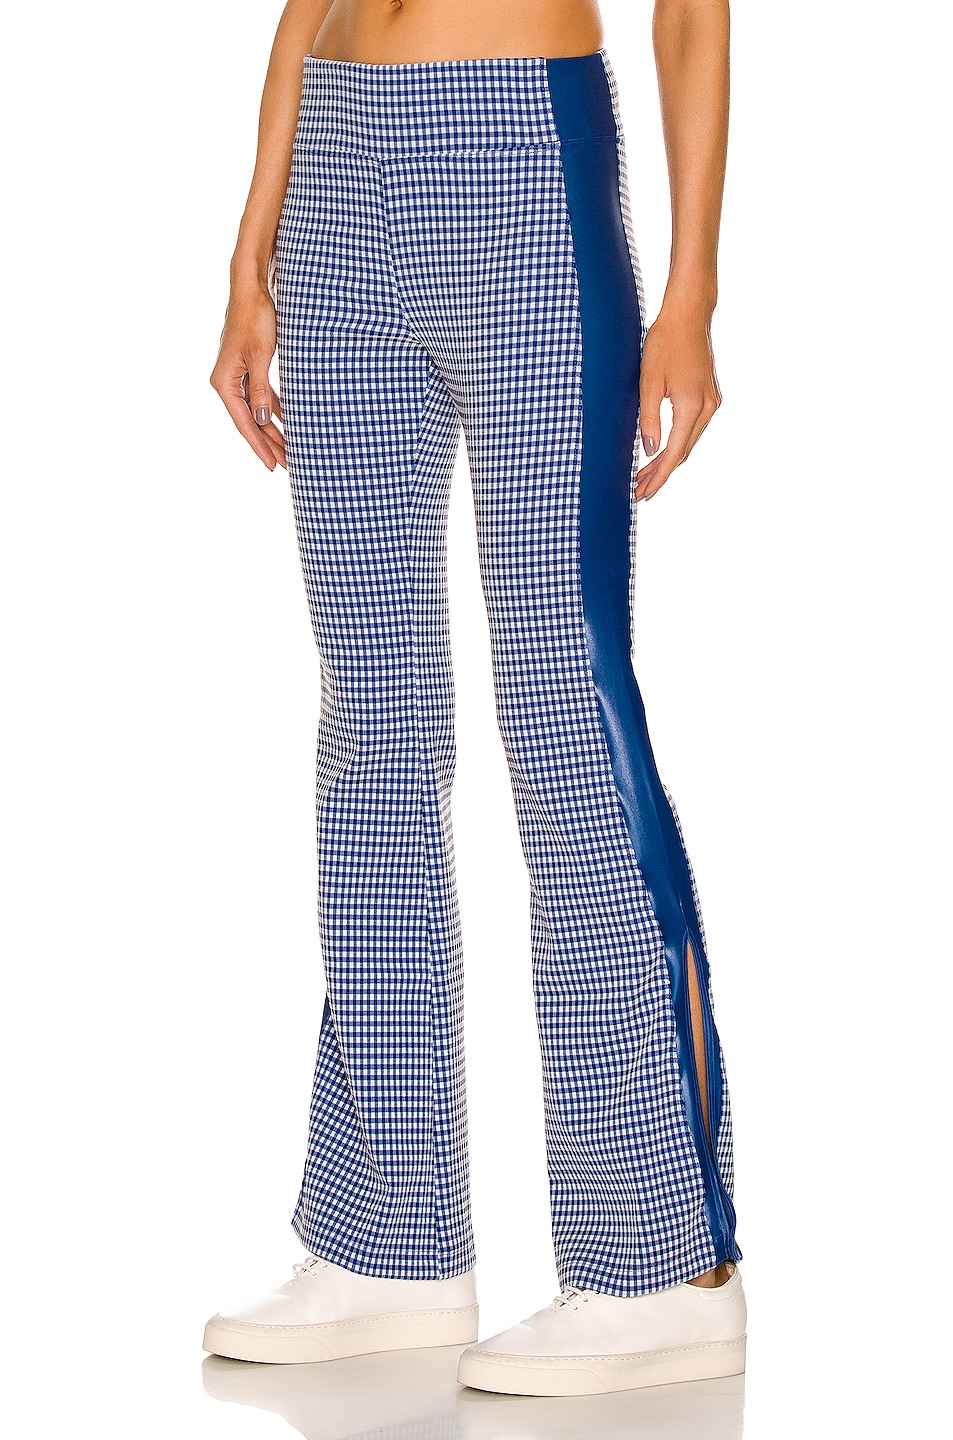 Image 1 of KORAL Katylyn Redford High Rise Flare Pant in Lapis Blue & White